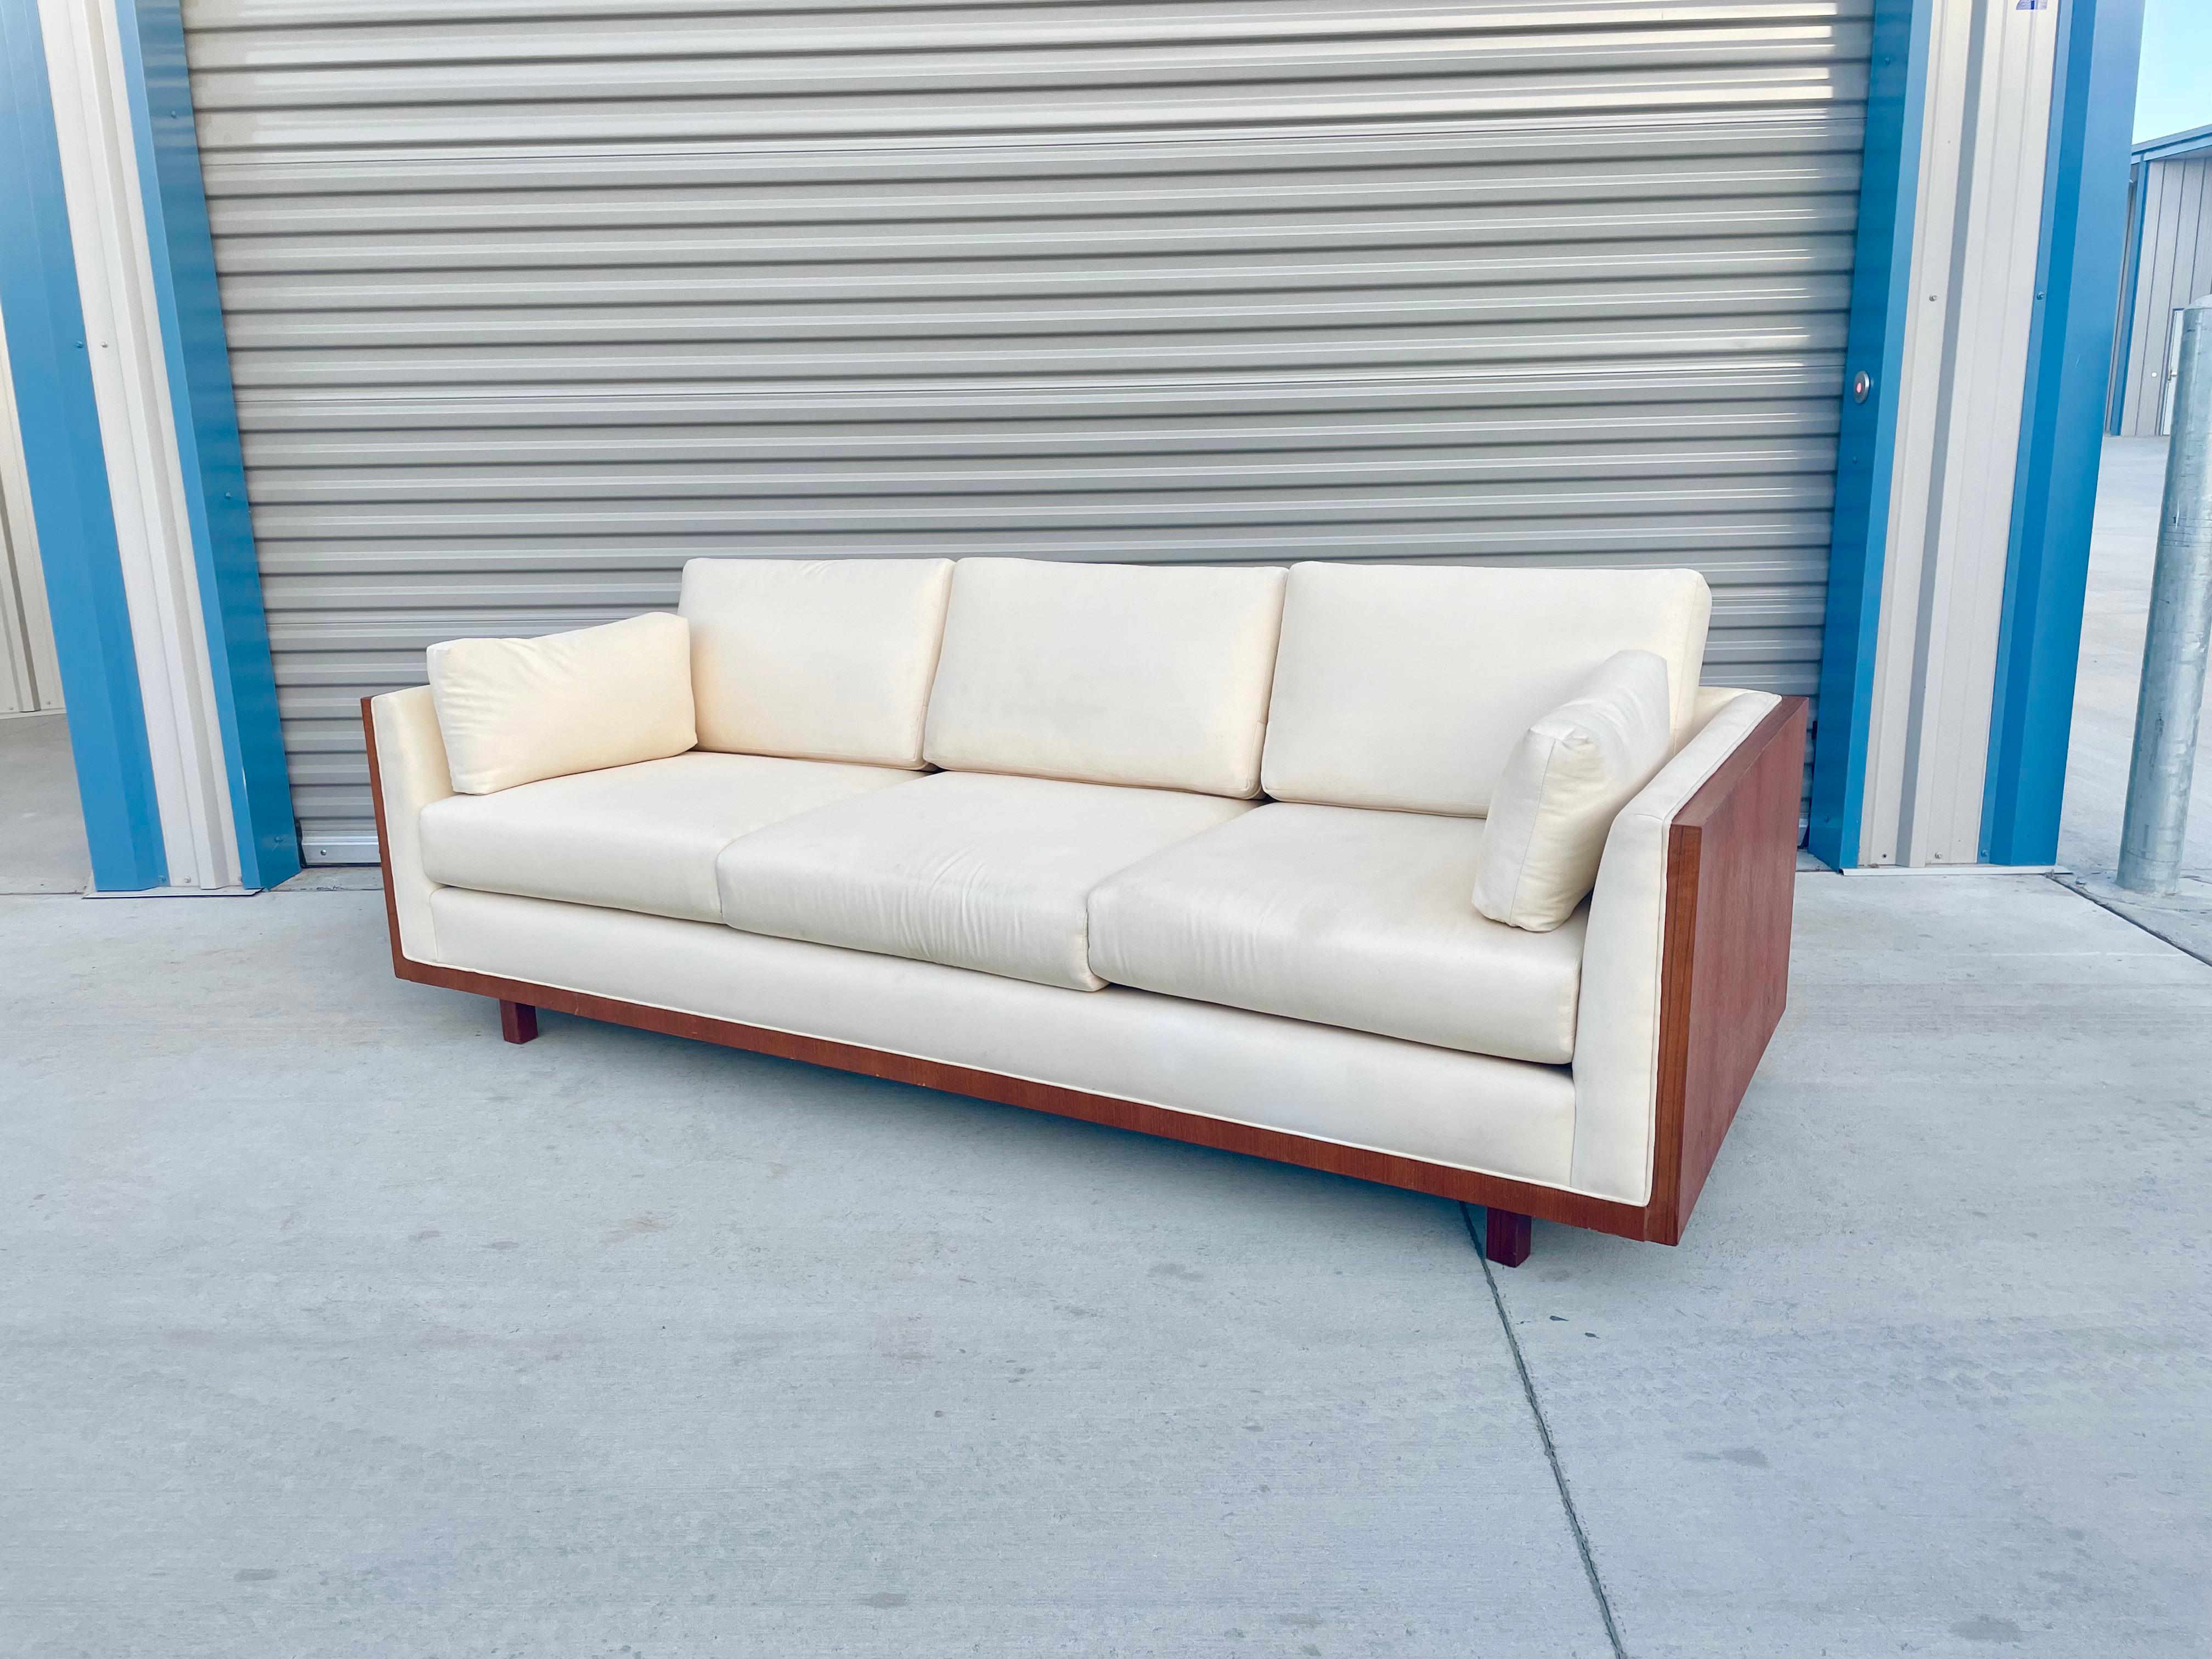 Mid-20th Century Midcentury Teak Sofa in the Style of Milo Baughman For Sale